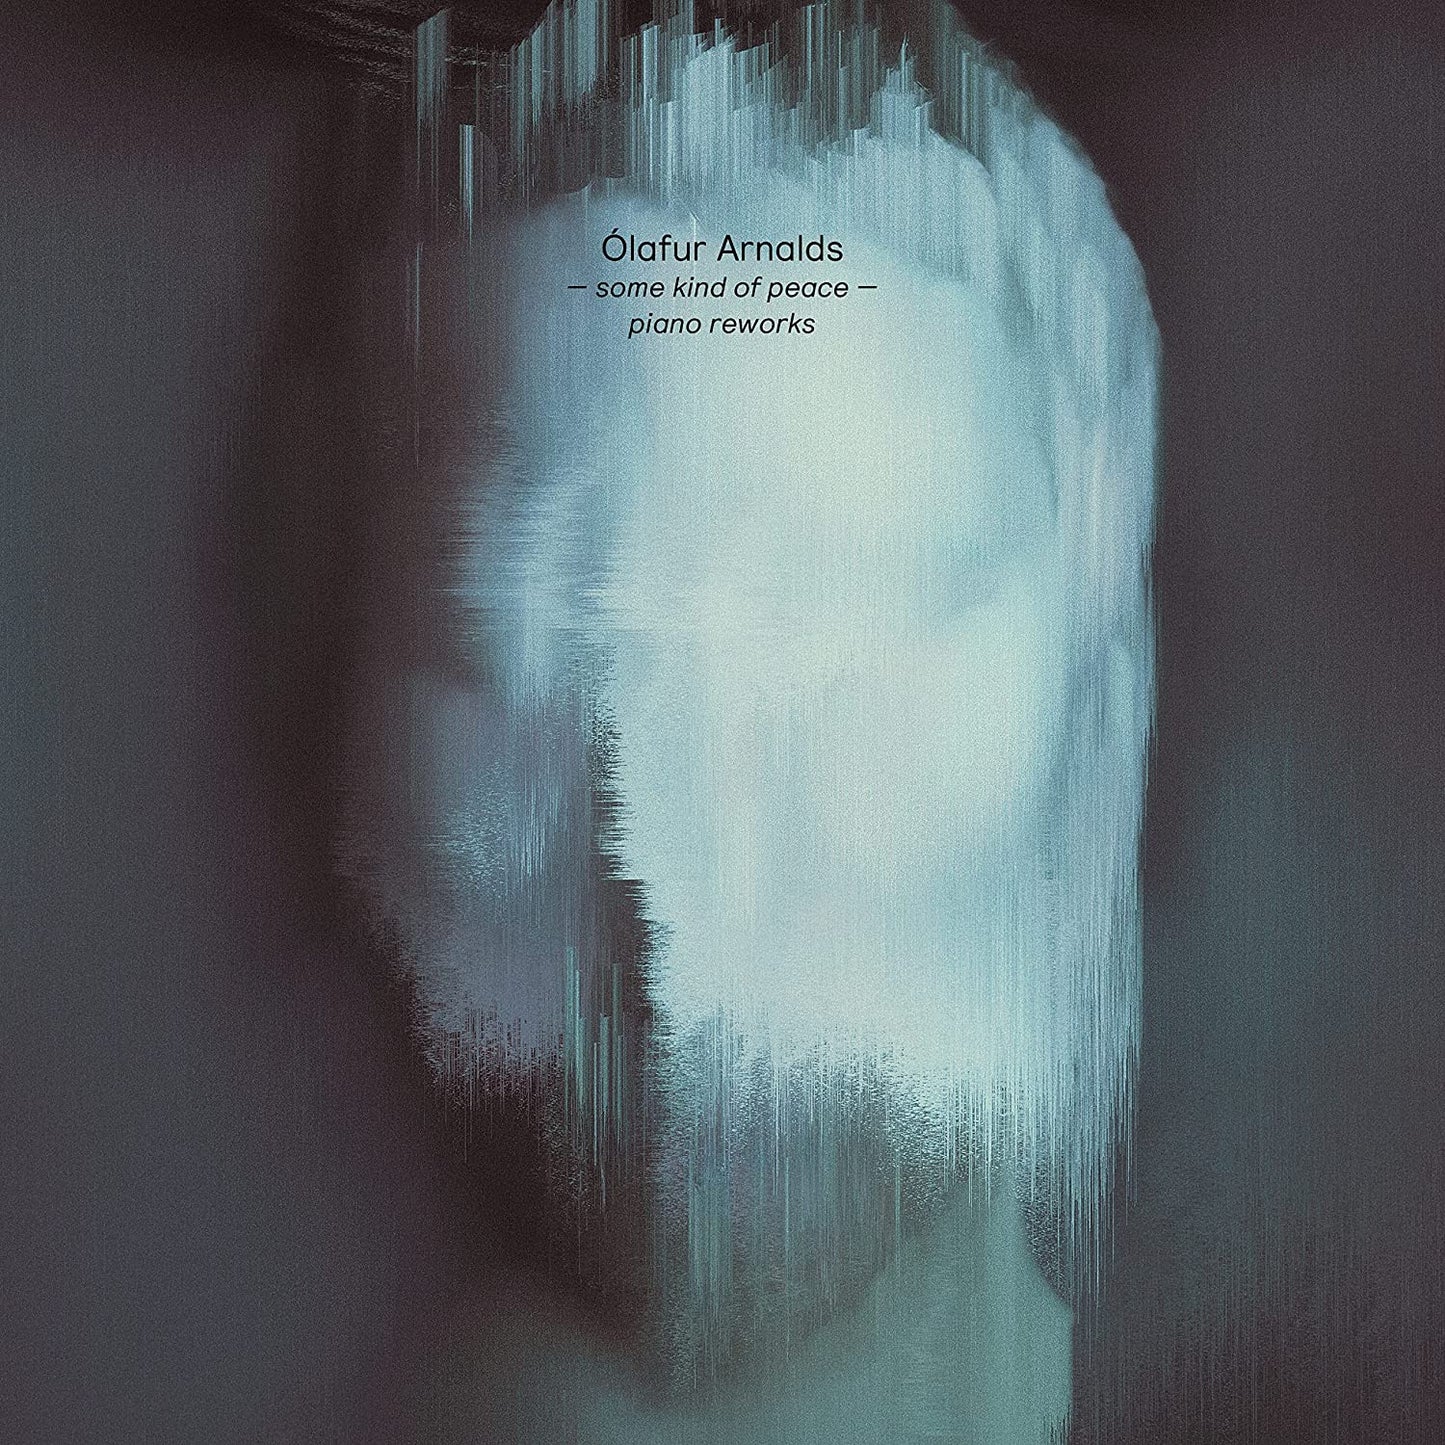 Olafur Arnalds - Some Kind of Peace: Piano Reworks | Buy the Vinyl LP